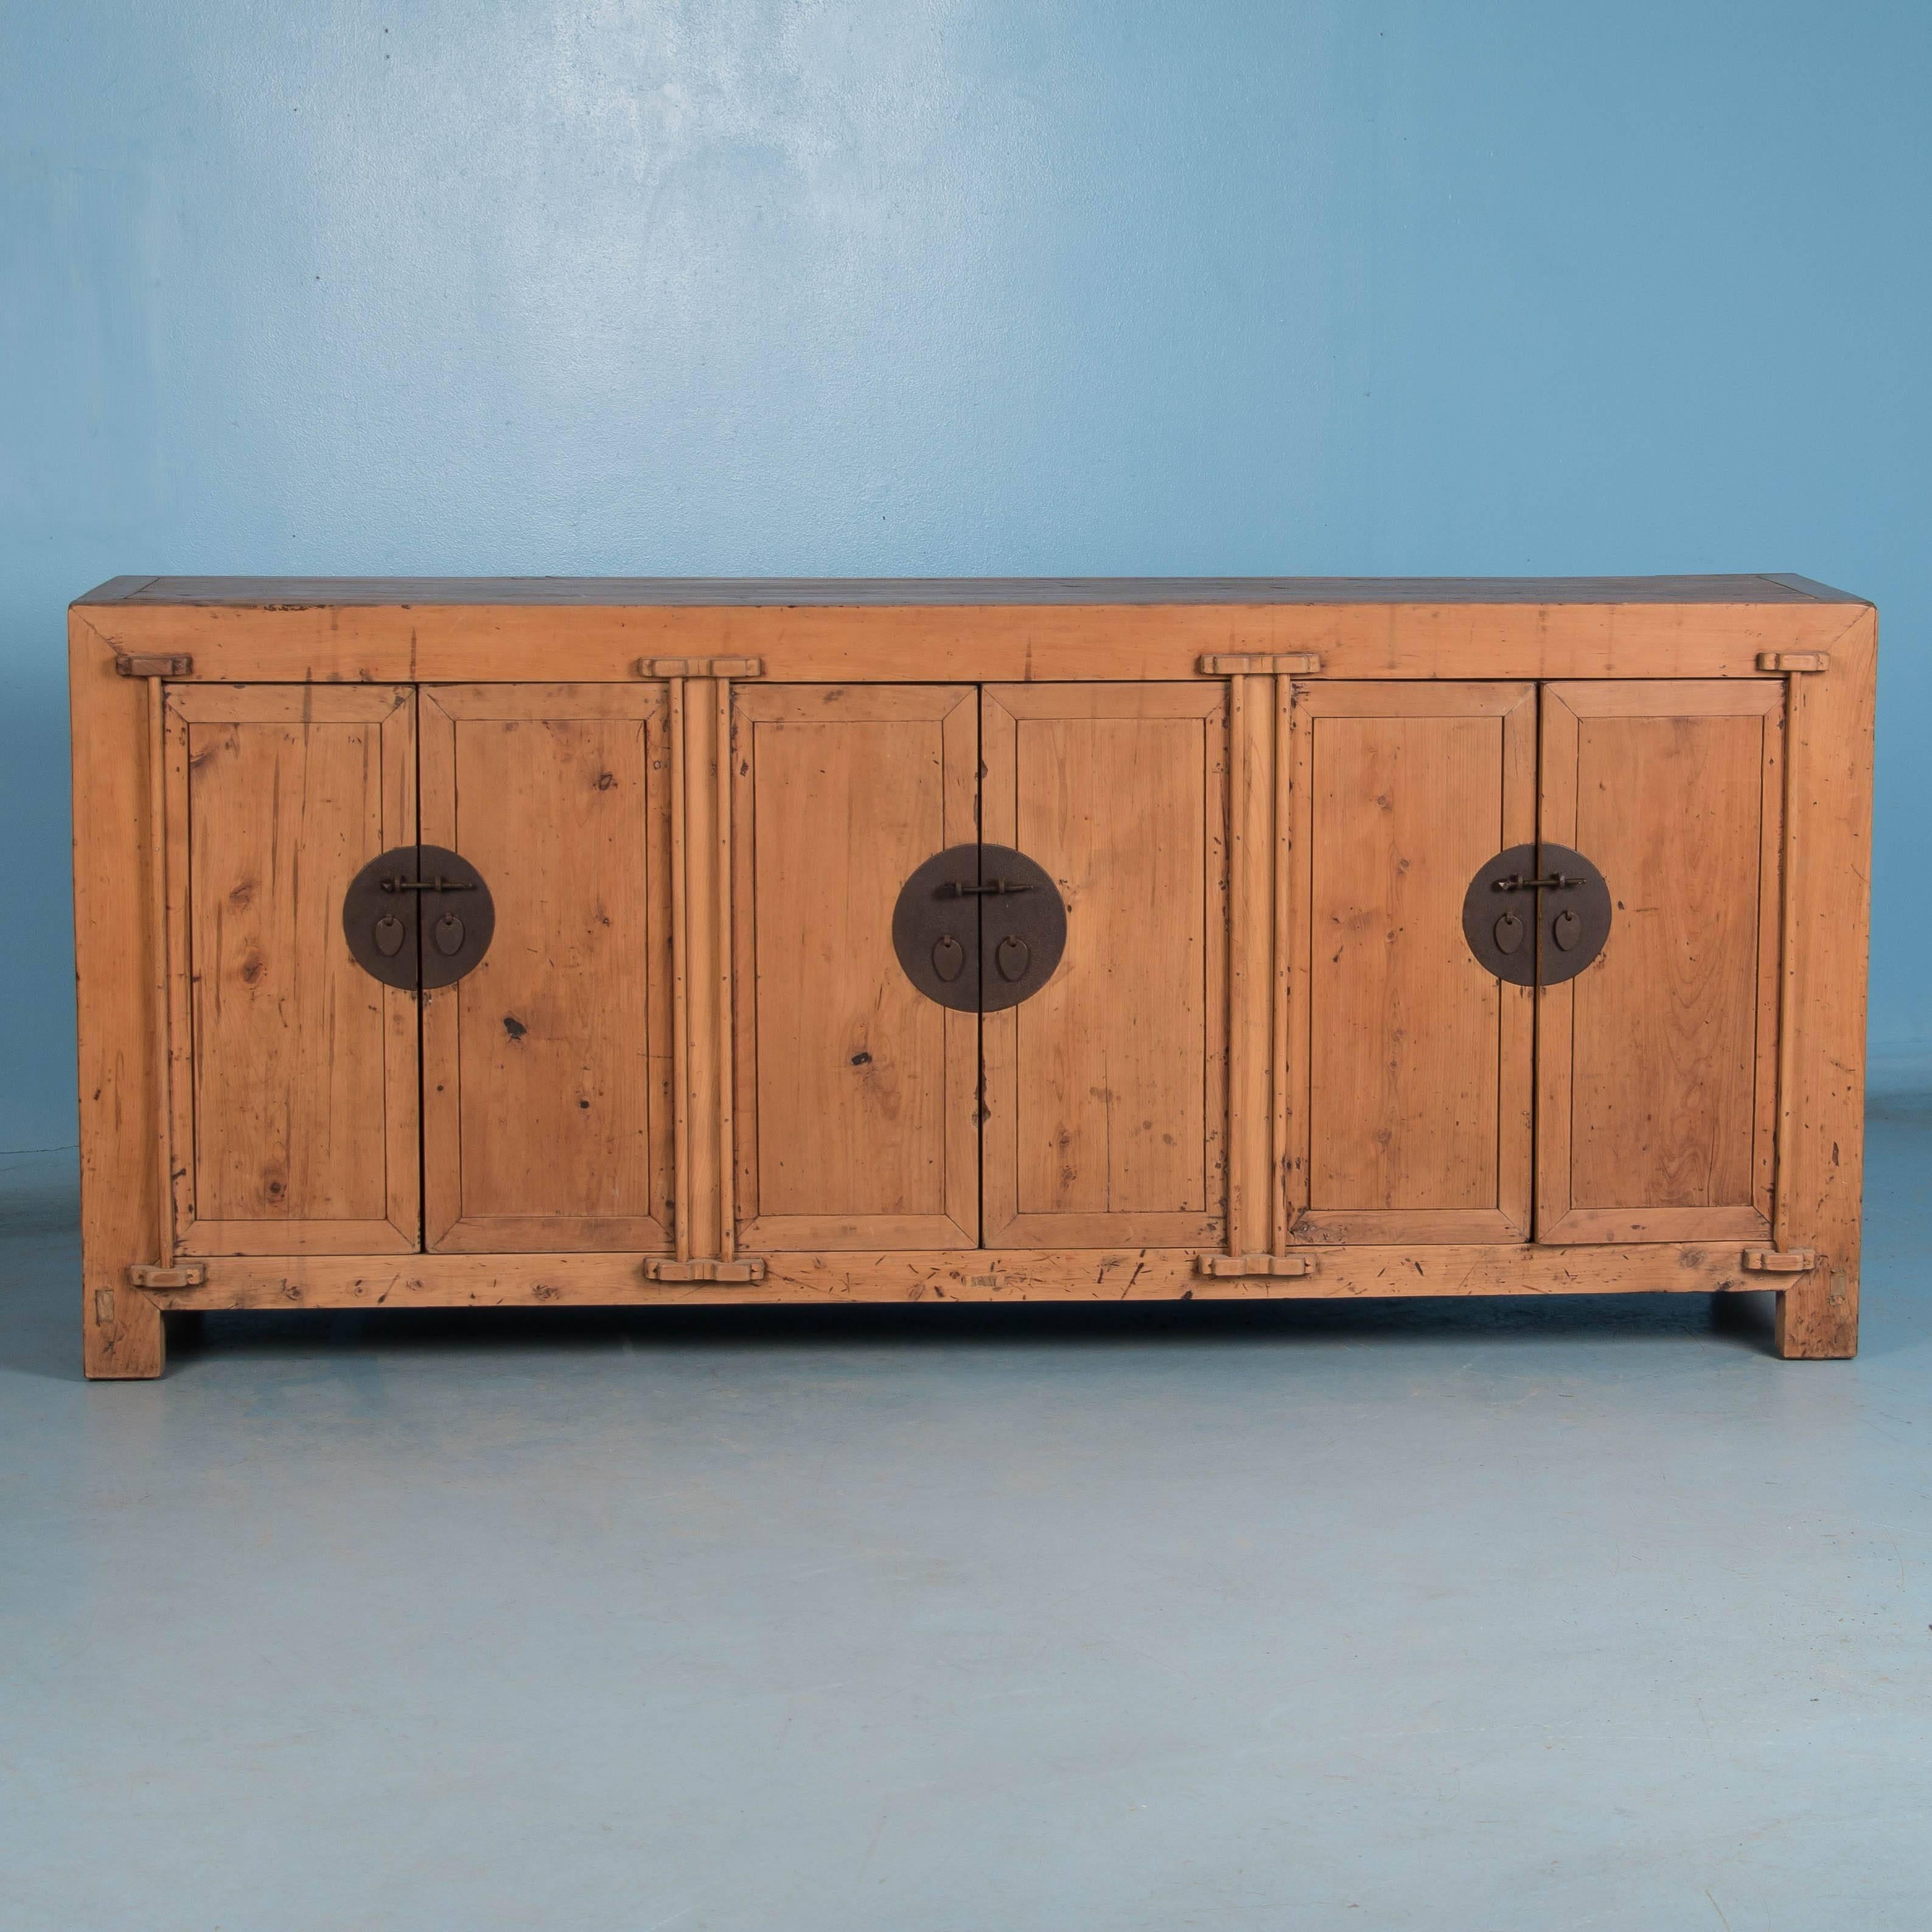 The clean lines and simplicity of this Chinese sideboard with it's unfinished wood, gives this piece a more country feel. The aged red lacquer on the inside of each of the six doors is an indication that this piece was originally lacquered all-over.